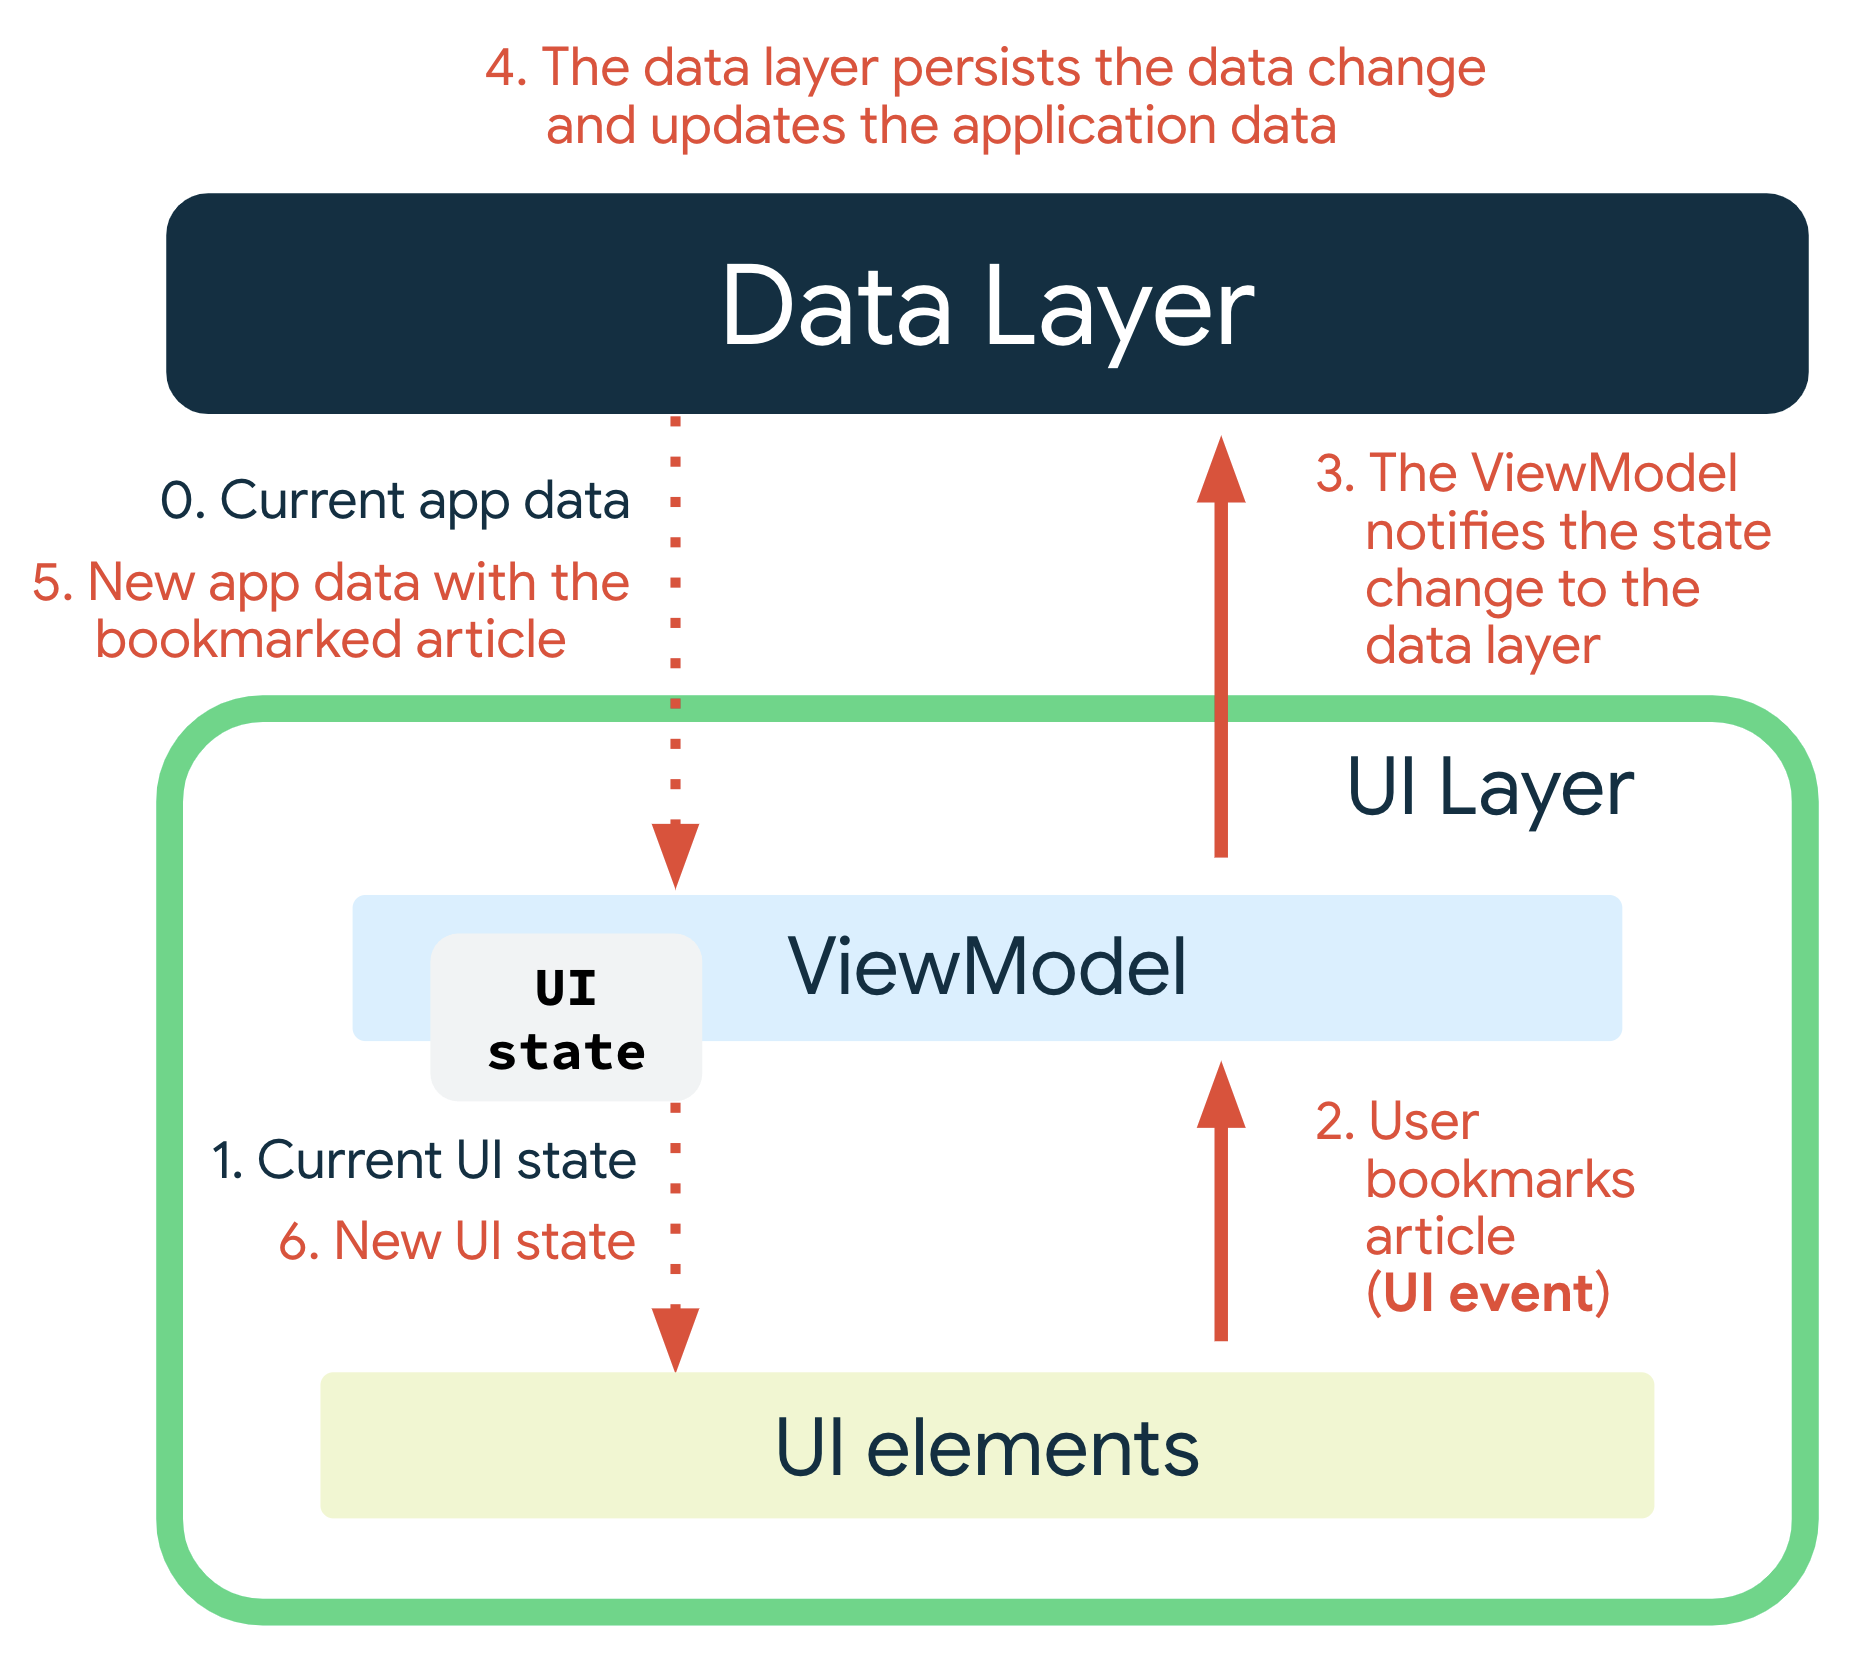 A UI event occurs when the user bookmarks an artcile. The ViewModel
    notifies the data layer of the state change. The data layer persists the
    data change and updates the application data. The new app data with the
    bookmarked article is passed up to the ViewModel, which then produces the
    new UI state and passes it to the UI elements for display.